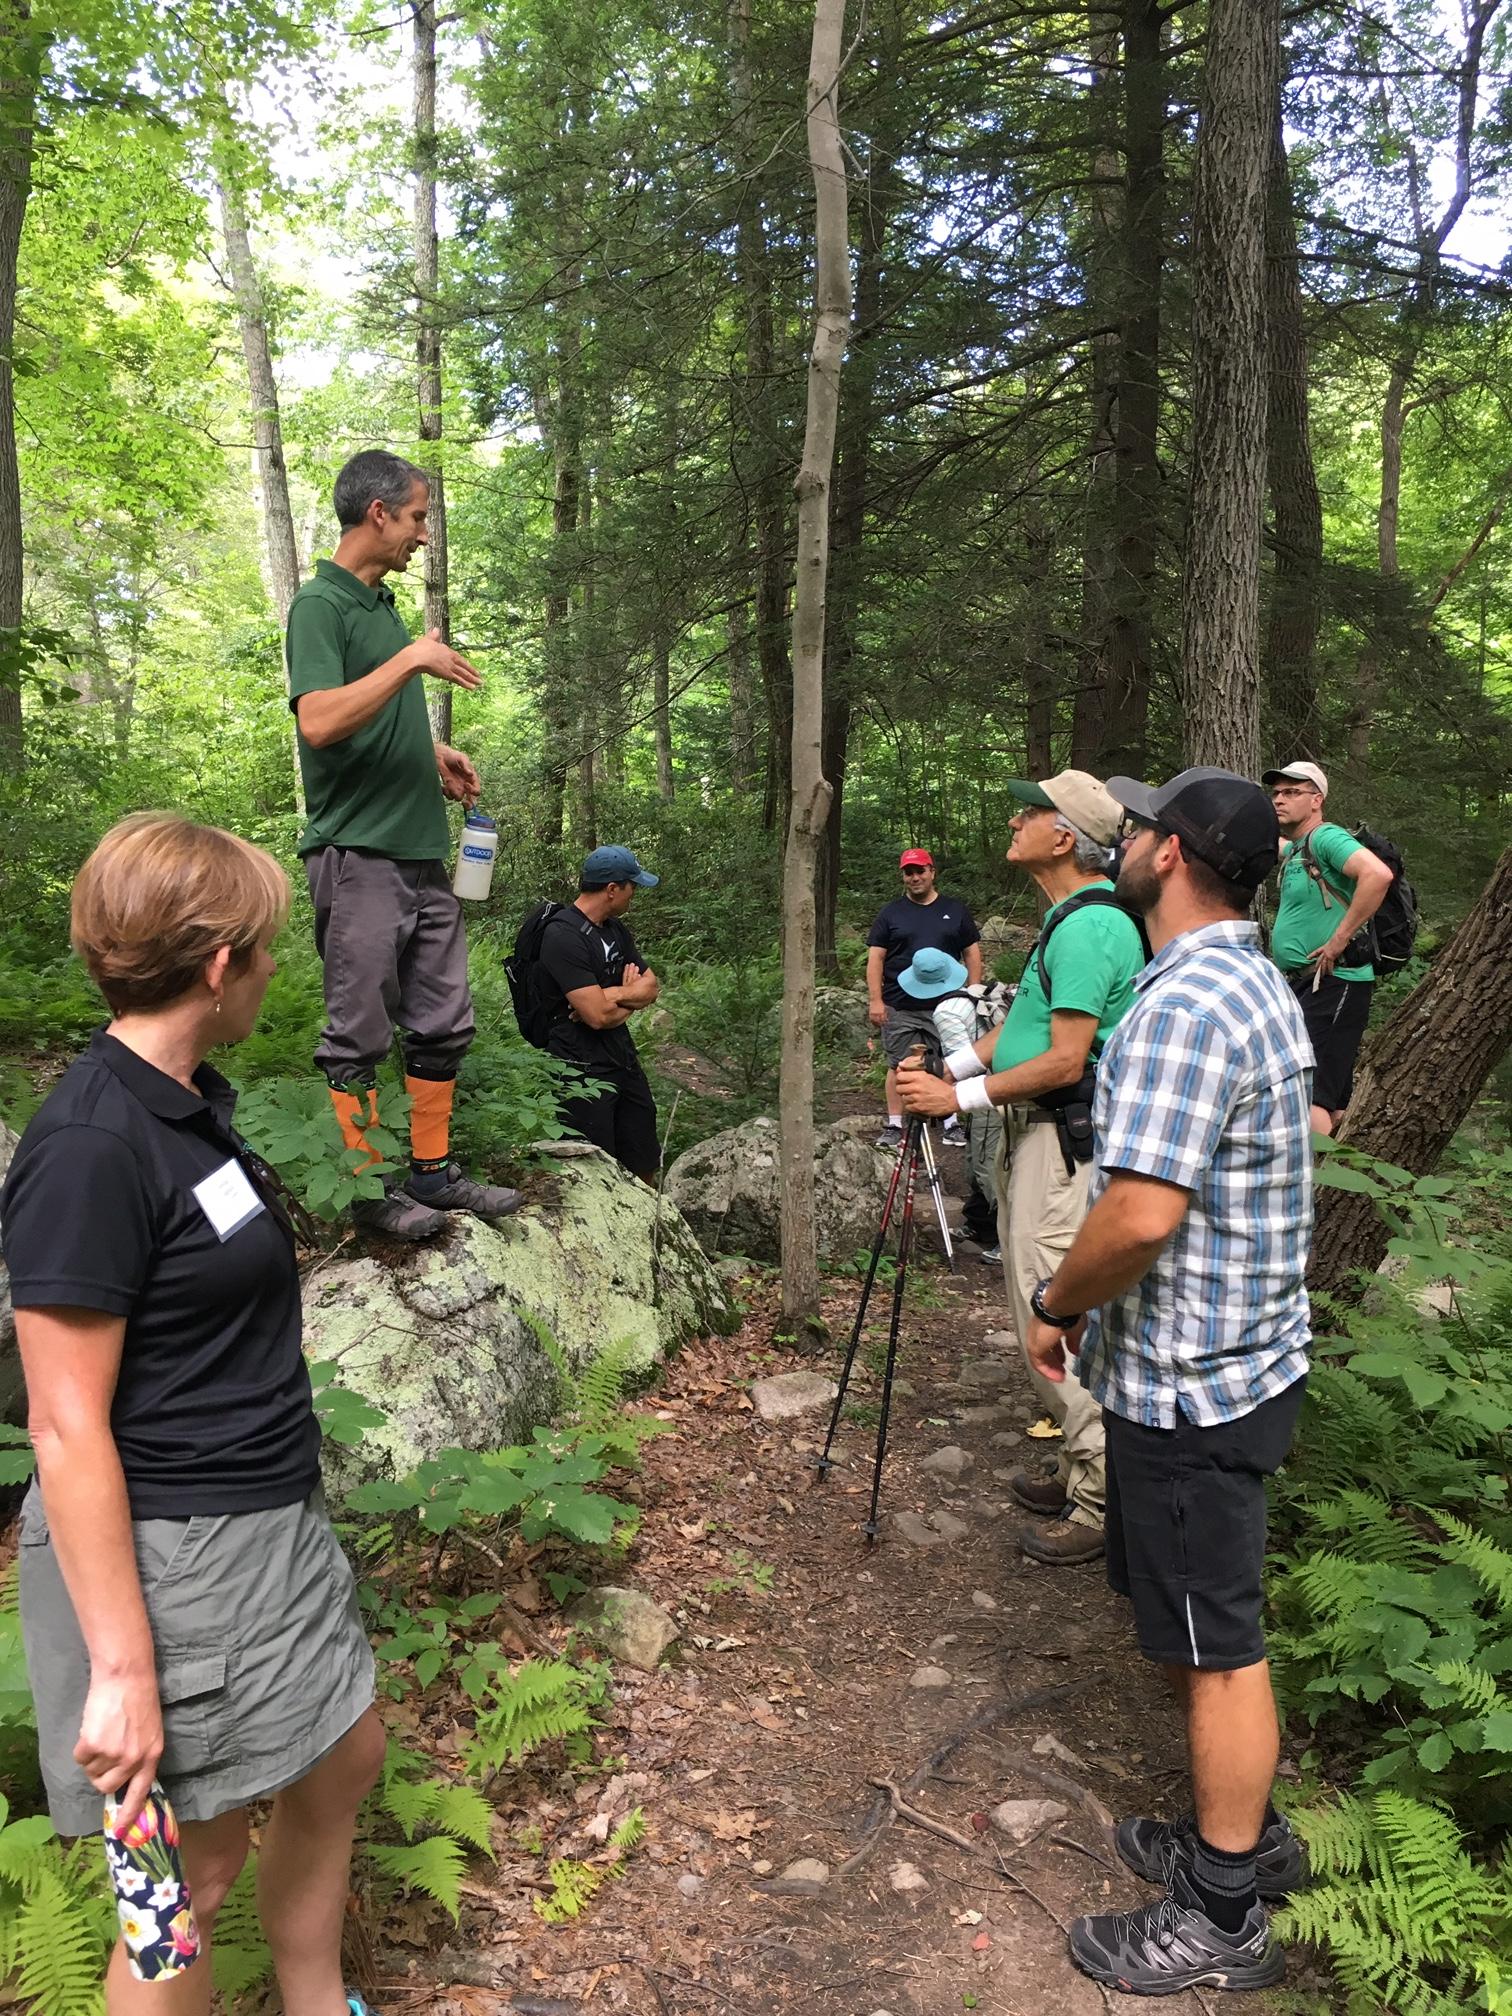 Trail Conference Field Manager Erik Mickelson talking with agency partners and leaders in hiking, mountain biking, and equestrian communities.